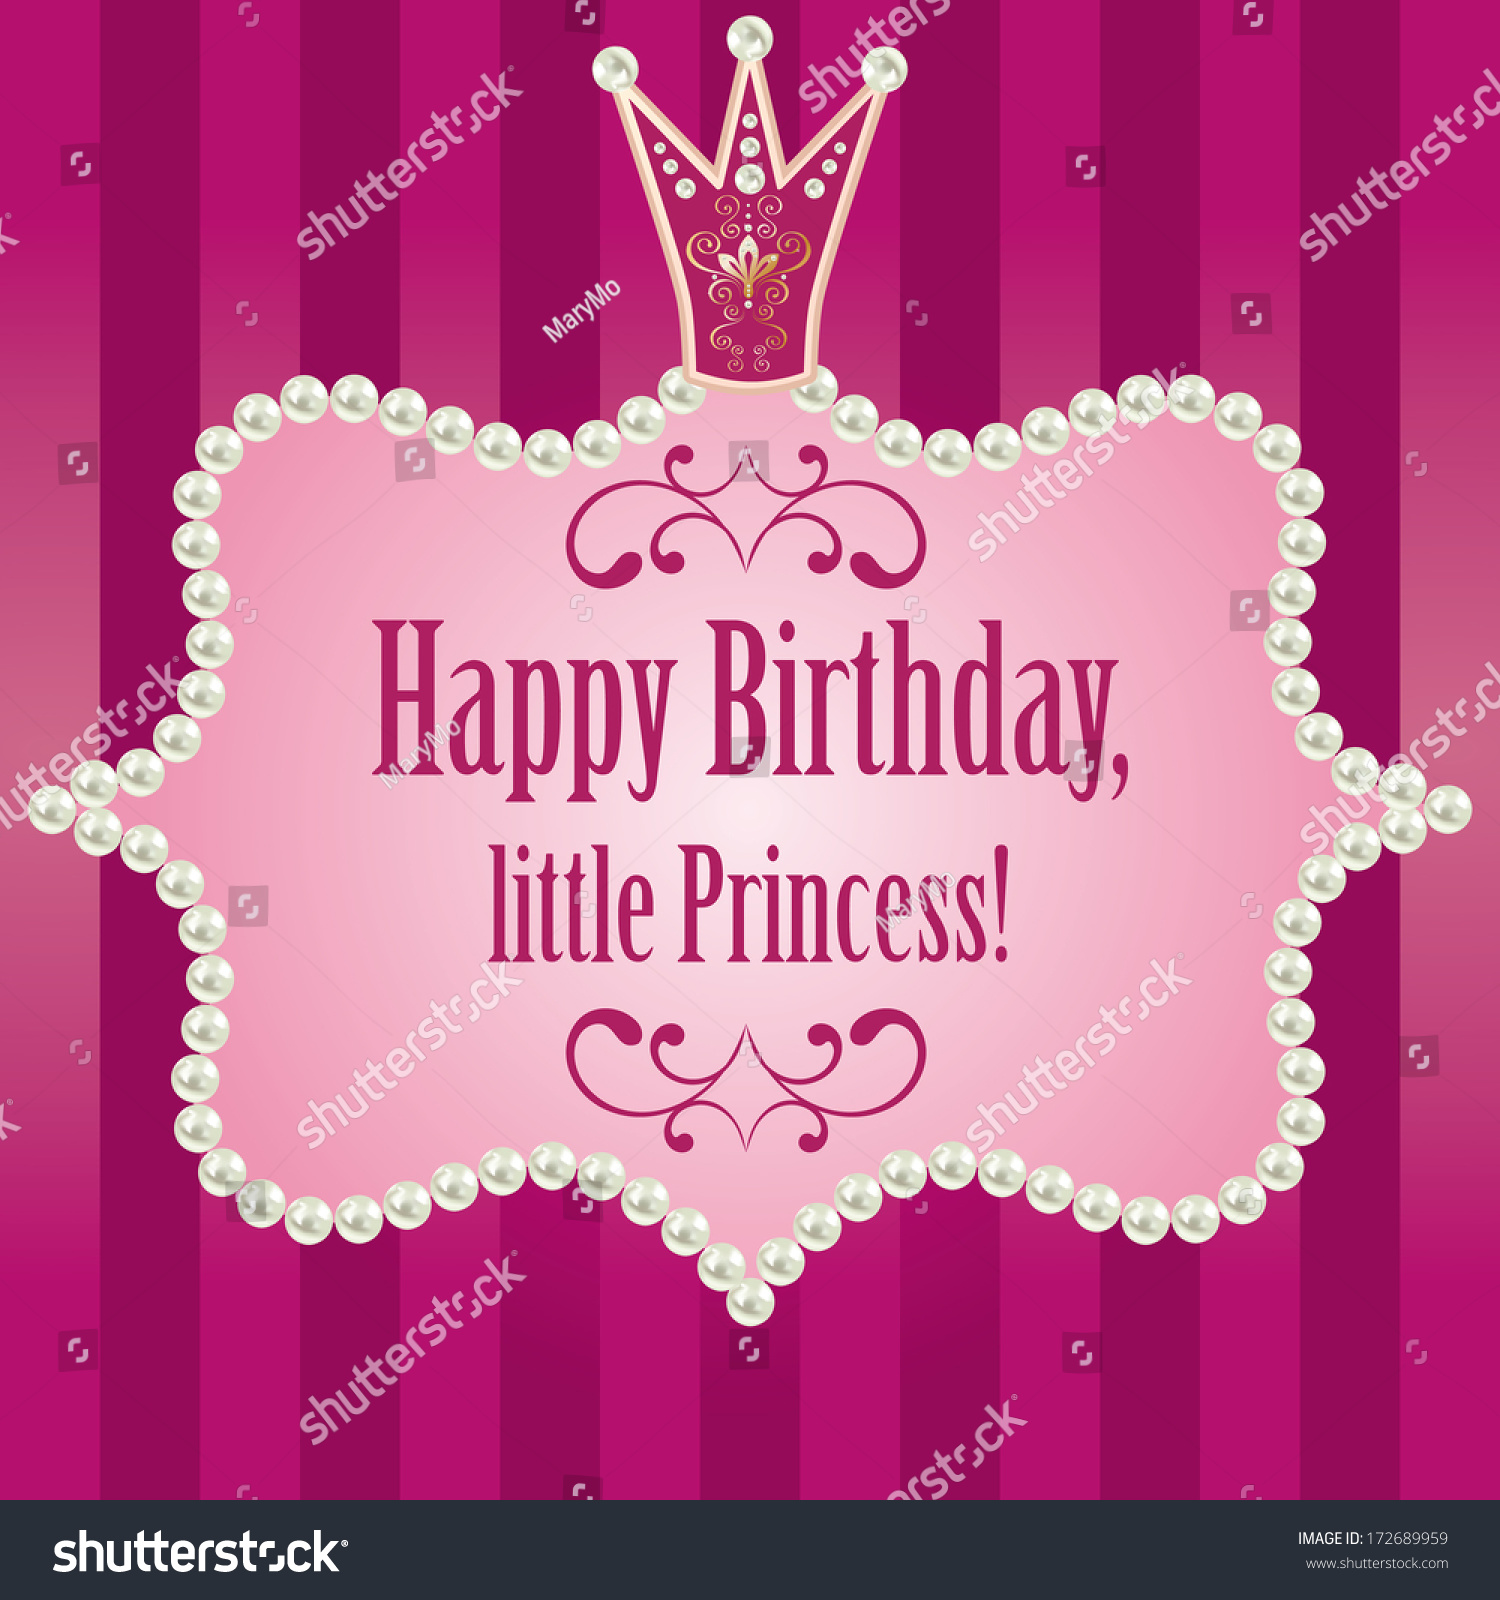 Cute Bright Pink Purple Striped Background. Birthday Card For Little ...